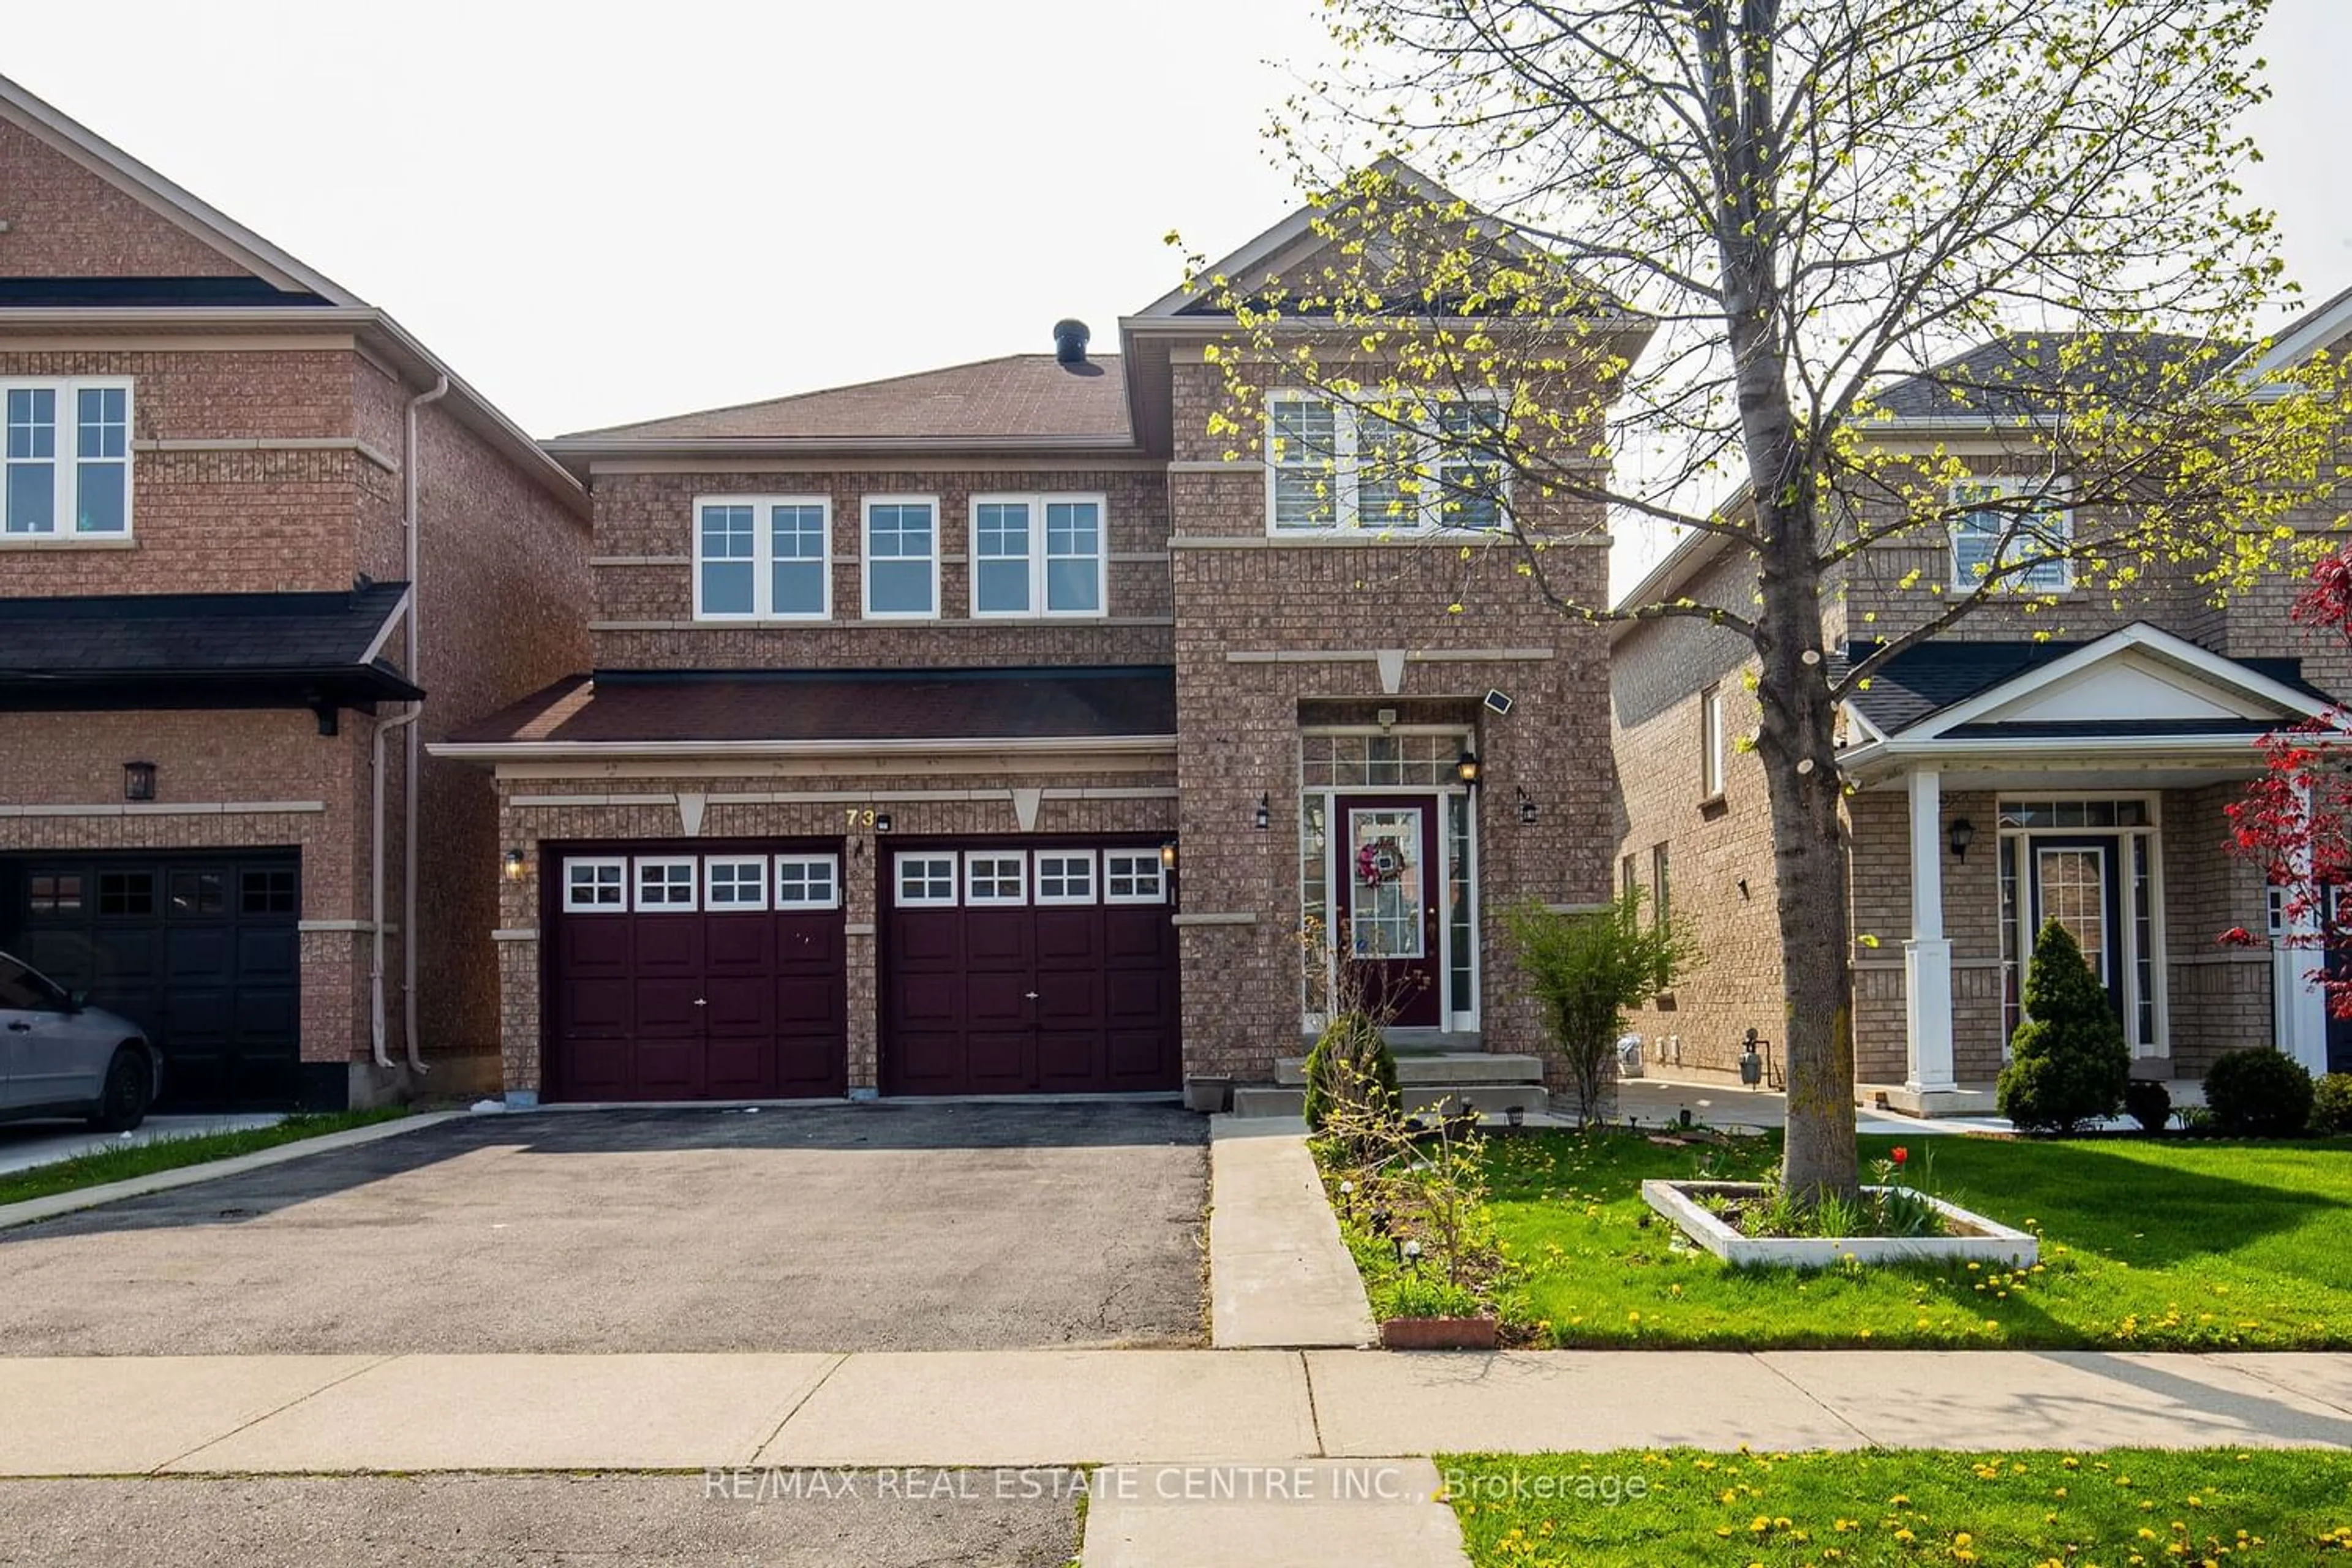 Home with brick exterior material for 73 Pantomine Blvd, Brampton Ontario L6Y 5N4